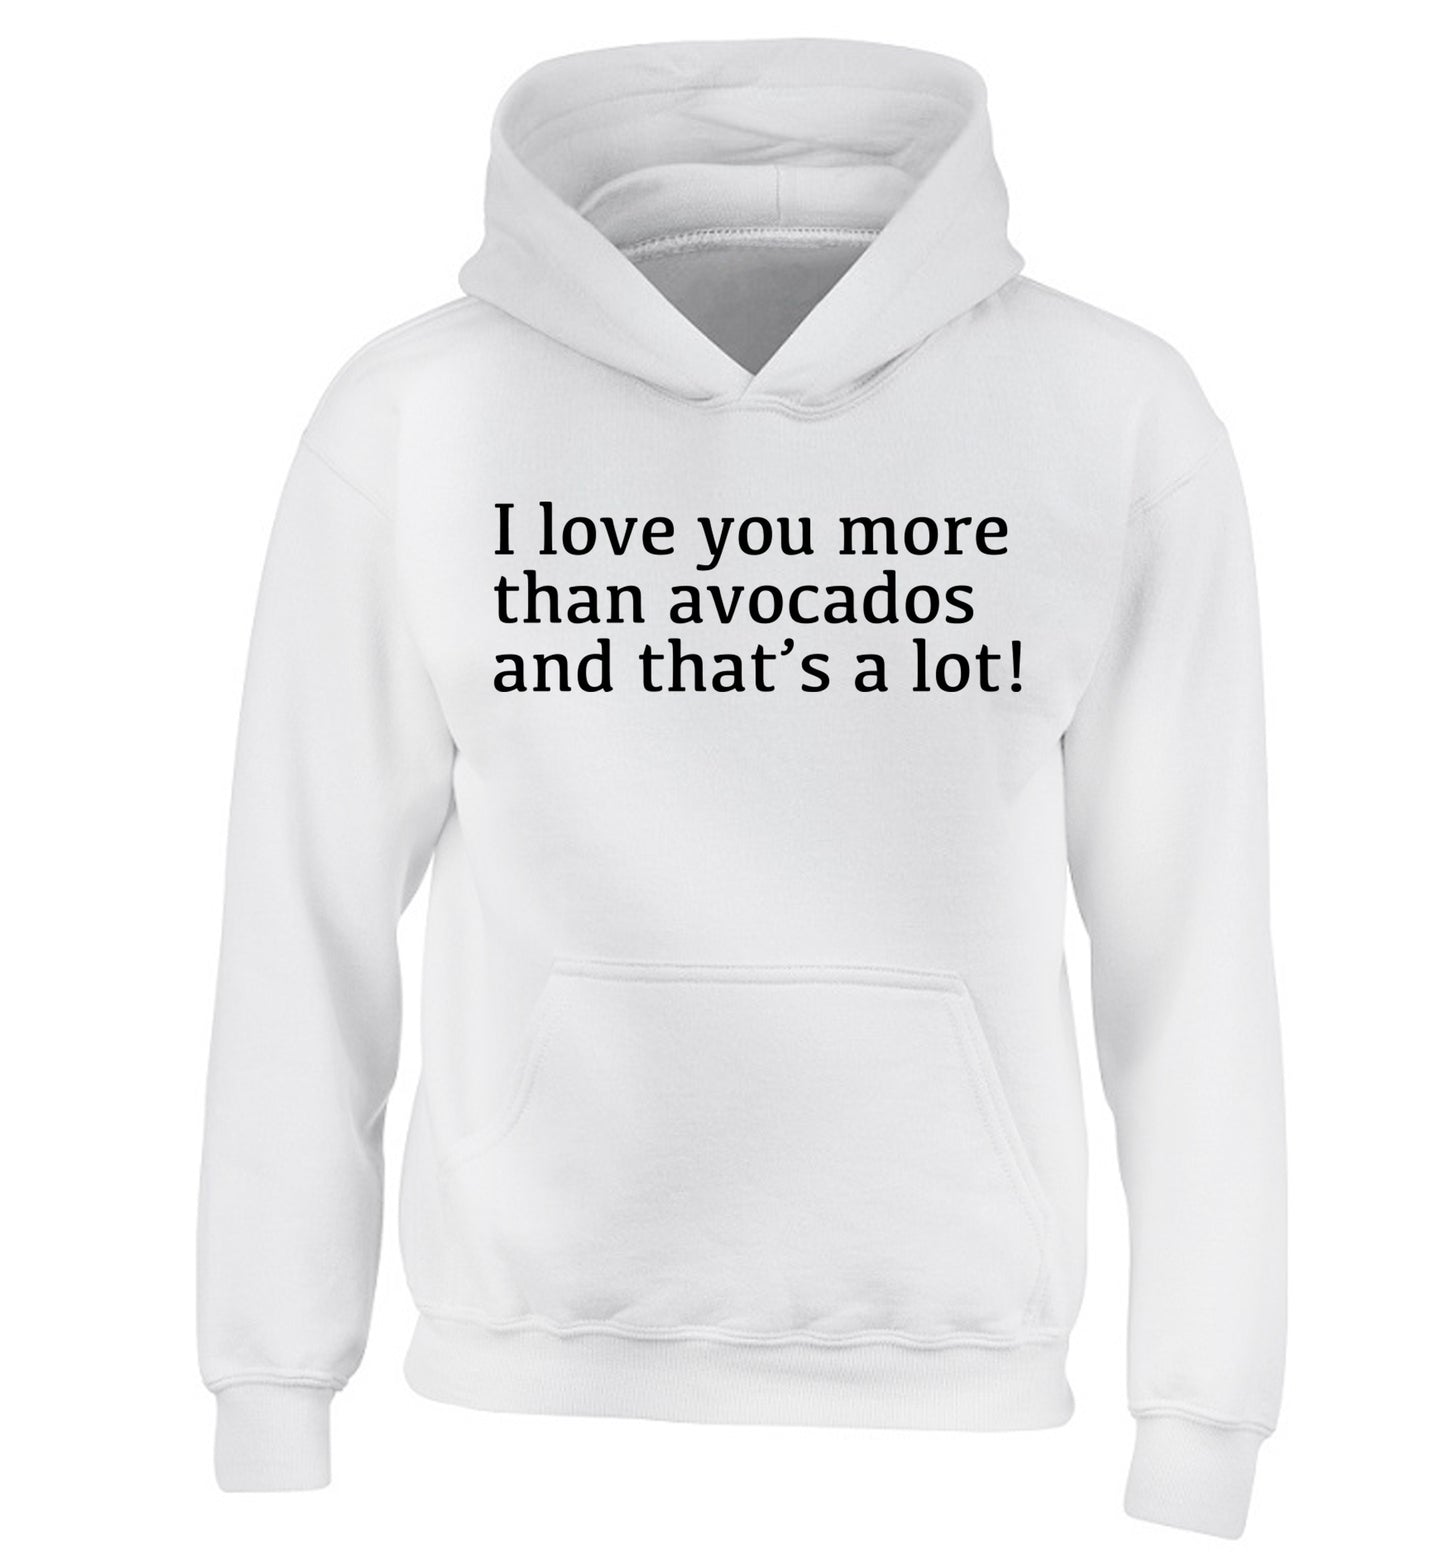 I love you more than avocados and that's a lot children's white hoodie 12-14 Years